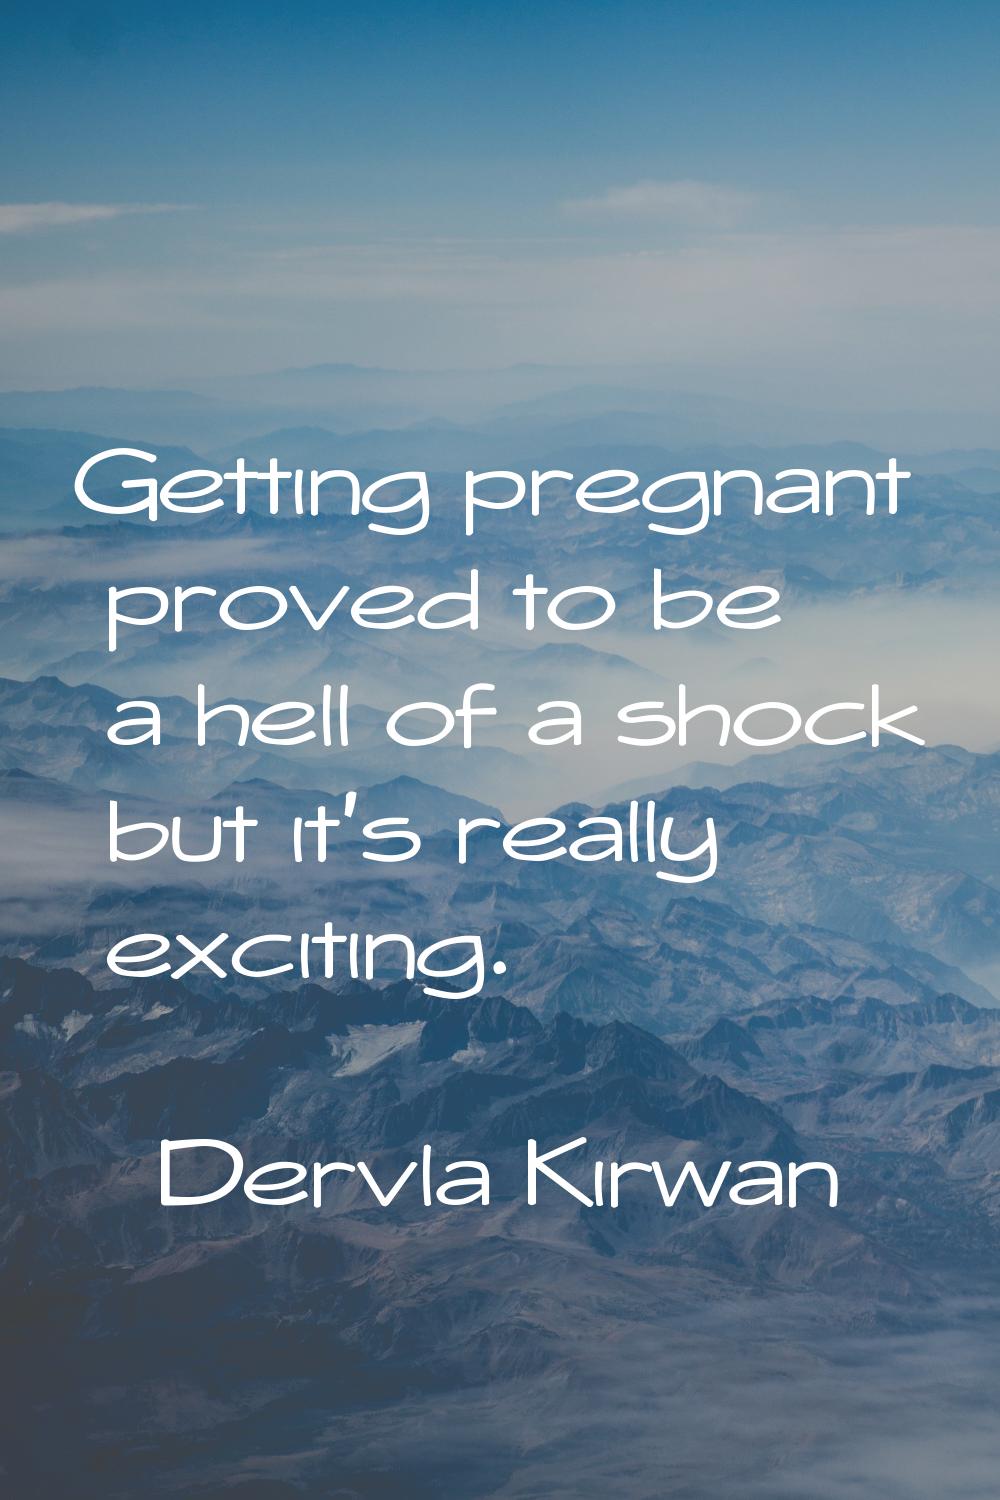 Getting pregnant proved to be a hell of a shock but it's really exciting.